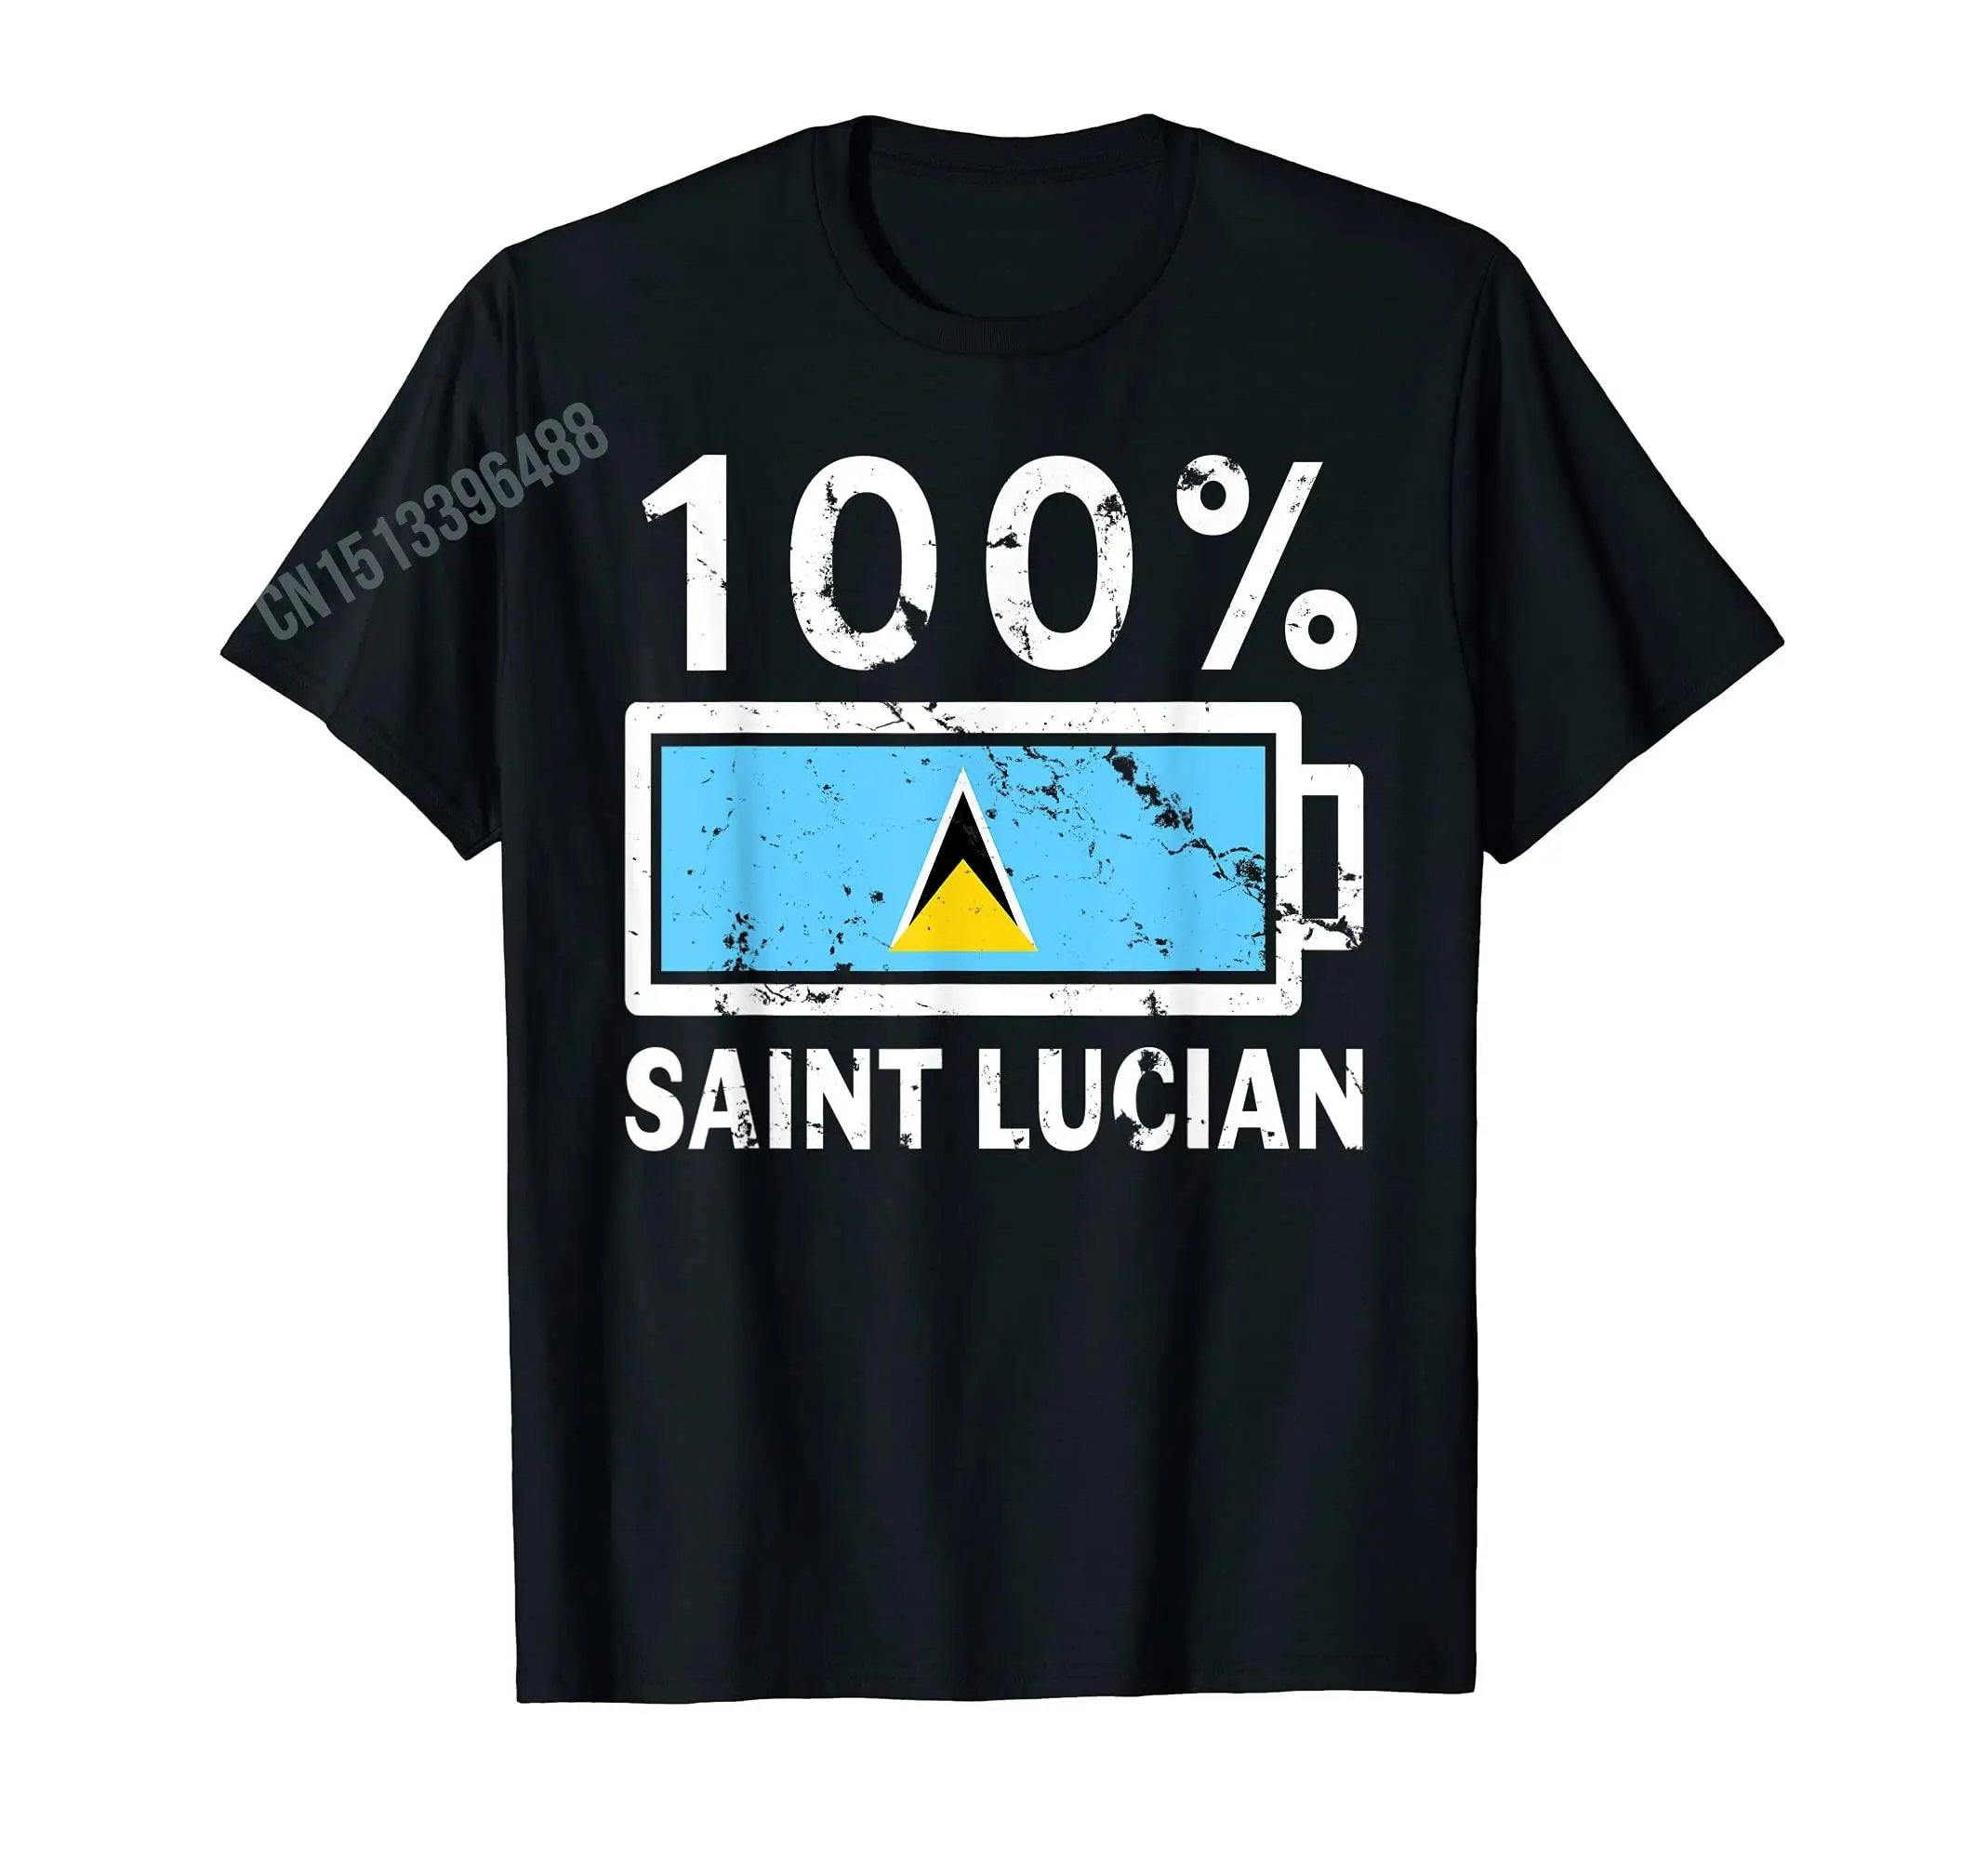 More Design IT'S IN MY DNA St. Saint Lucia Flag Pride National Country T- Shirt For Men Women T Shirt Tops Cotton Tees